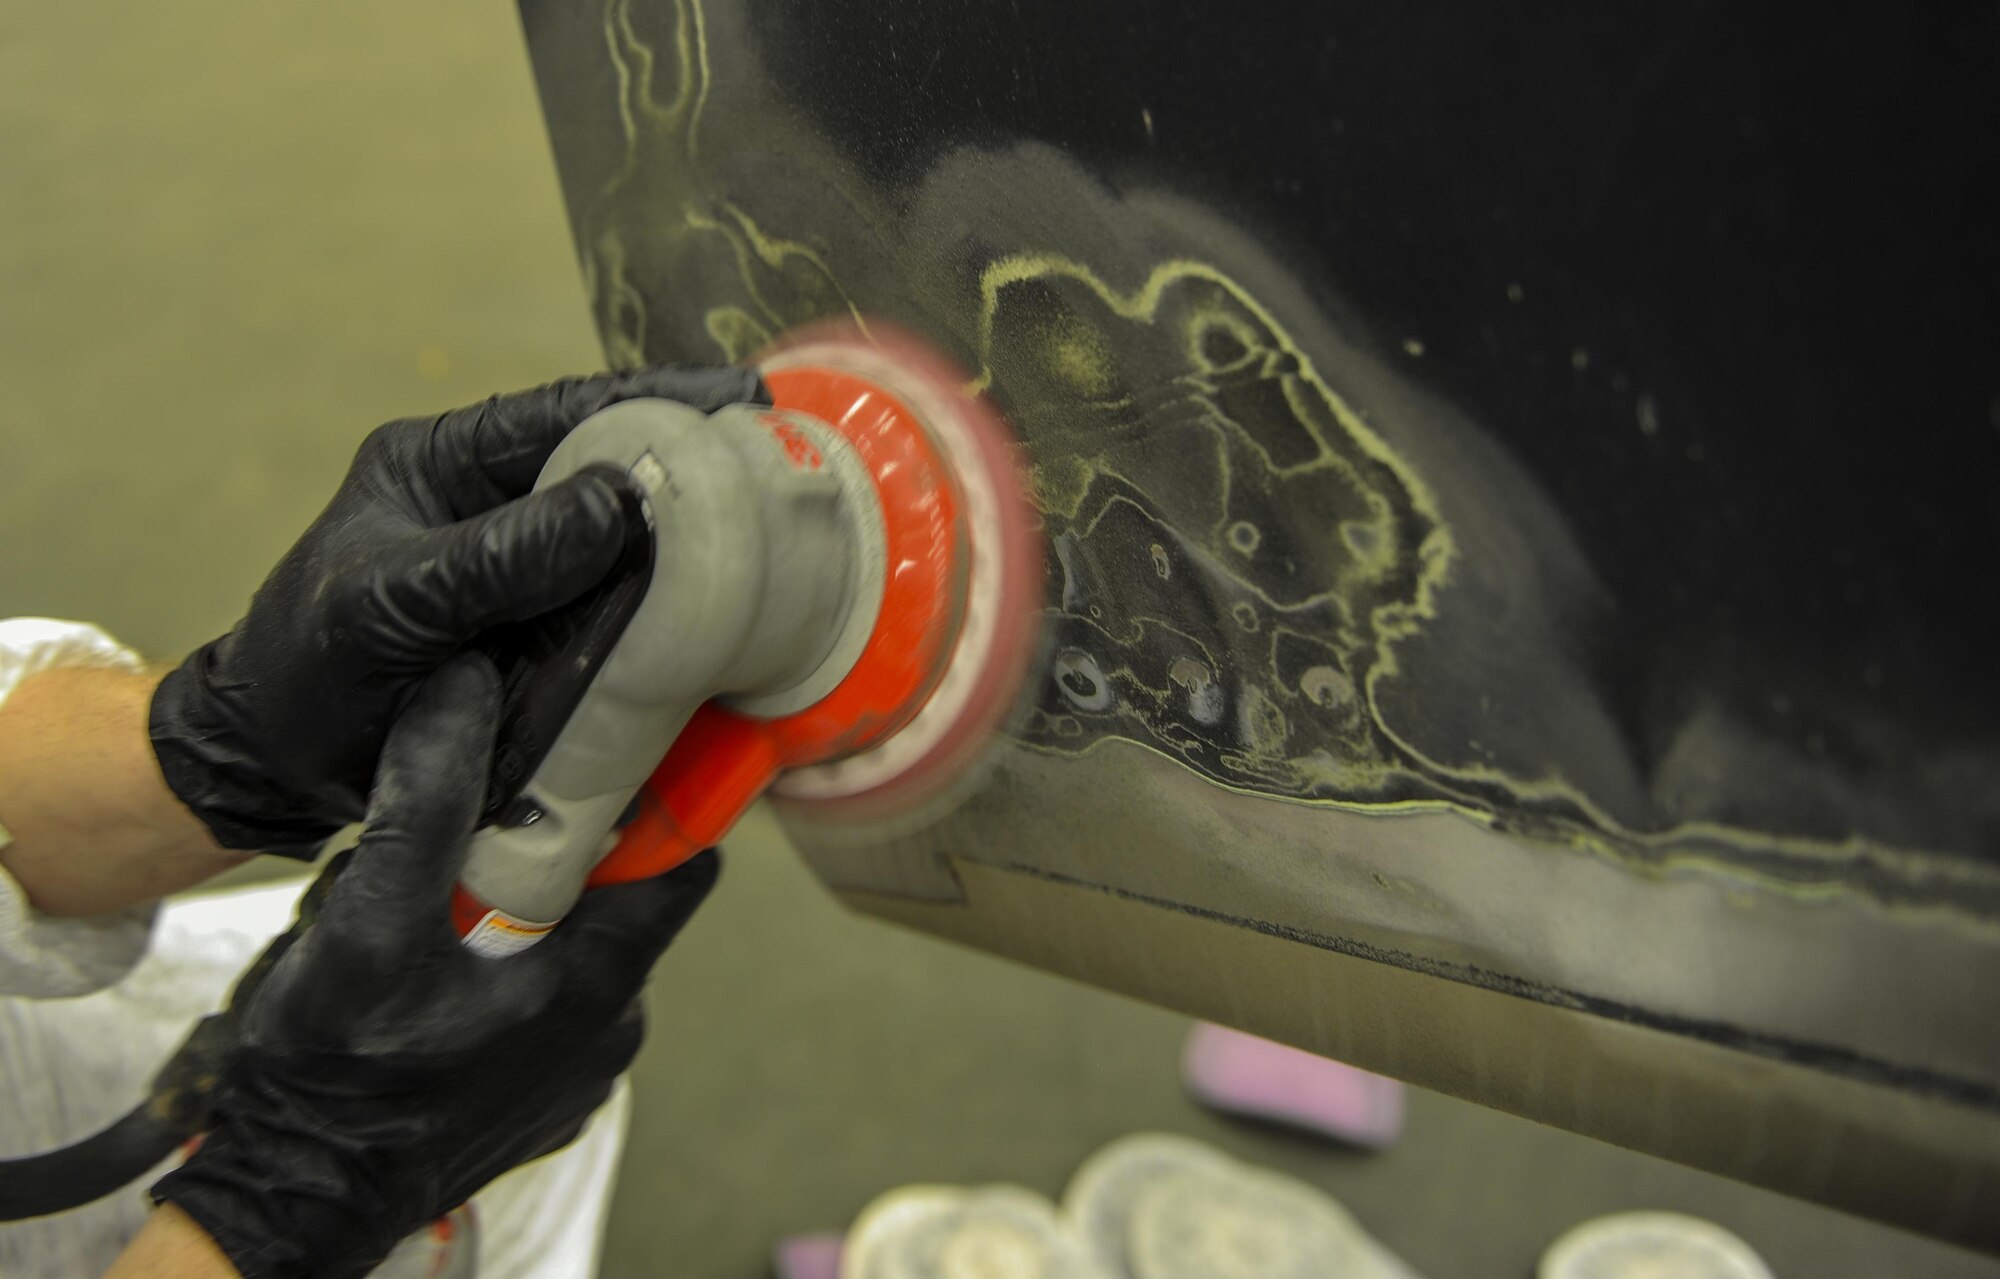 Airman 1st Class Ethan Short, an aircraft structural maintainer with the 1st Special Operations Maintenance Squadron, sands down a propeller to remove paint from a CV-22 Osprey at Hurlburt Field, Fla., March 28, 2017. Corrosion control Airmen restore the structural integrity of aircraft by repainting parts of the body that have been weakened by exposure to the environment and conducting composite repairs, prolonging the life of the asset. (U.S. Air Force photo by Airman 1st Class Isaac O. Guest IV) 